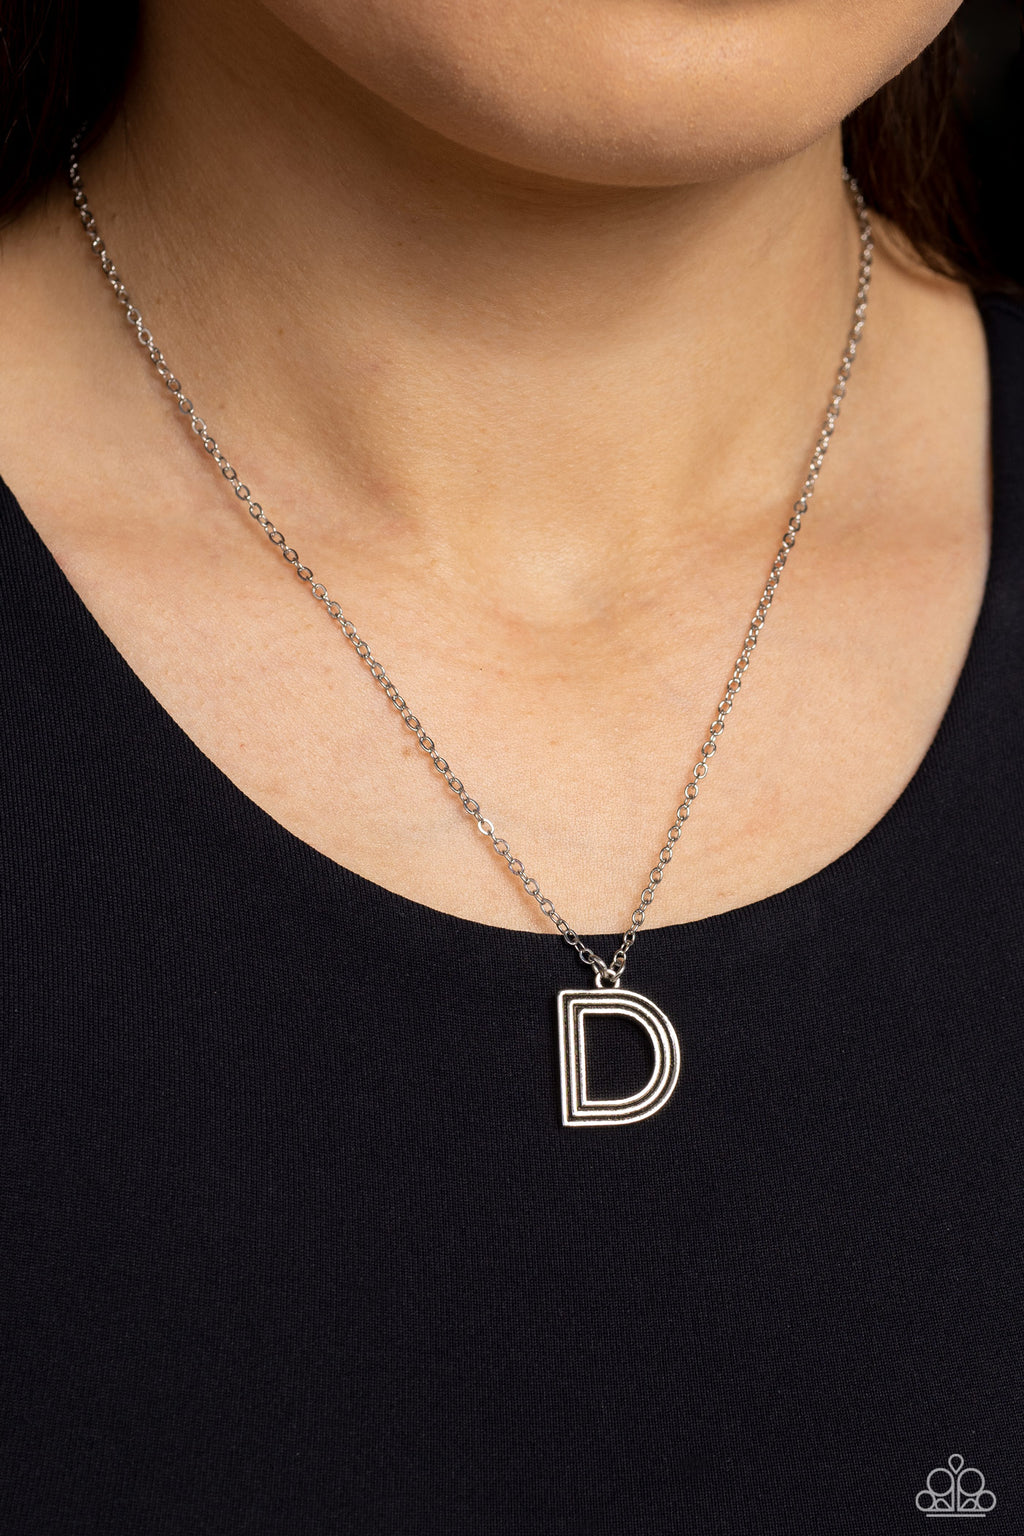 Paparazzi - Leave Your Initials - Silver - D Necklace